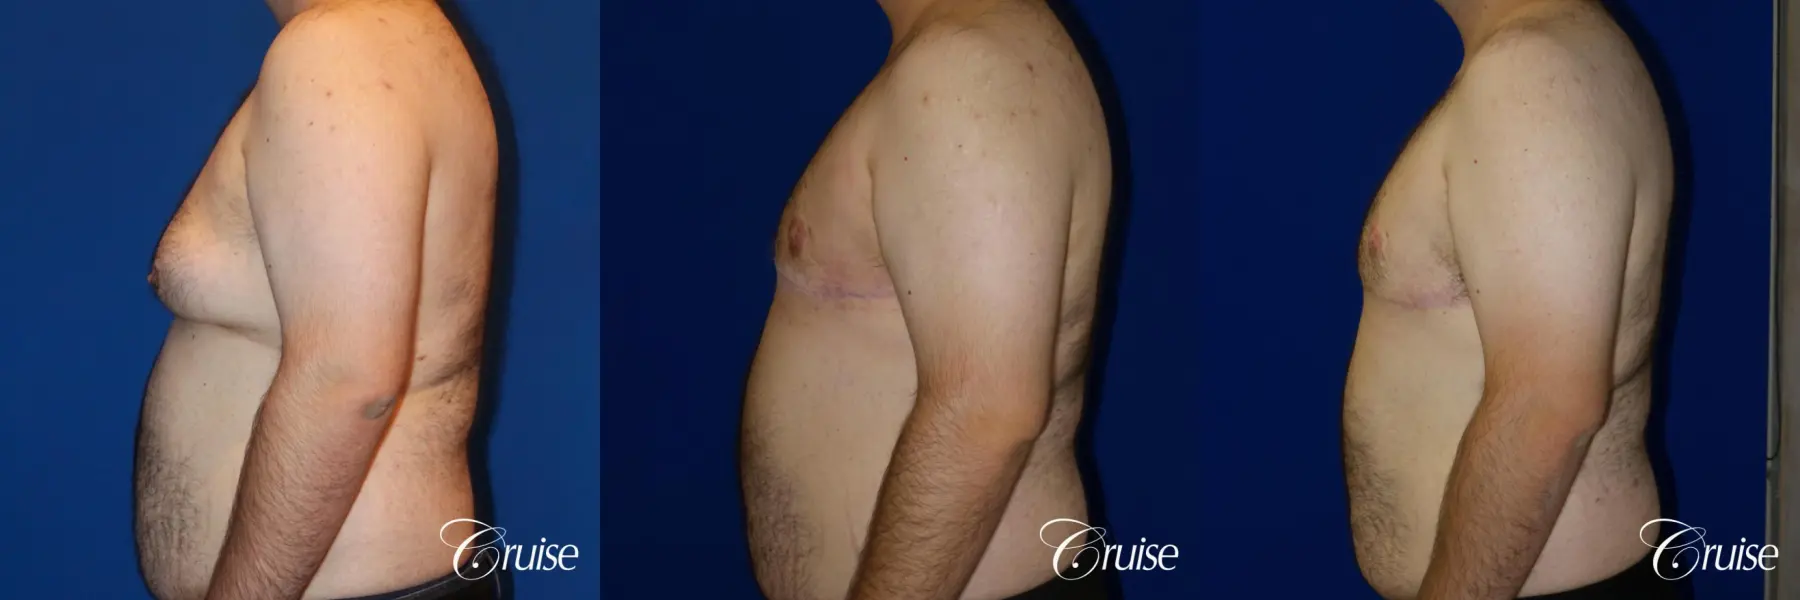 gynecomastia with free nipple graft - Before and After 3